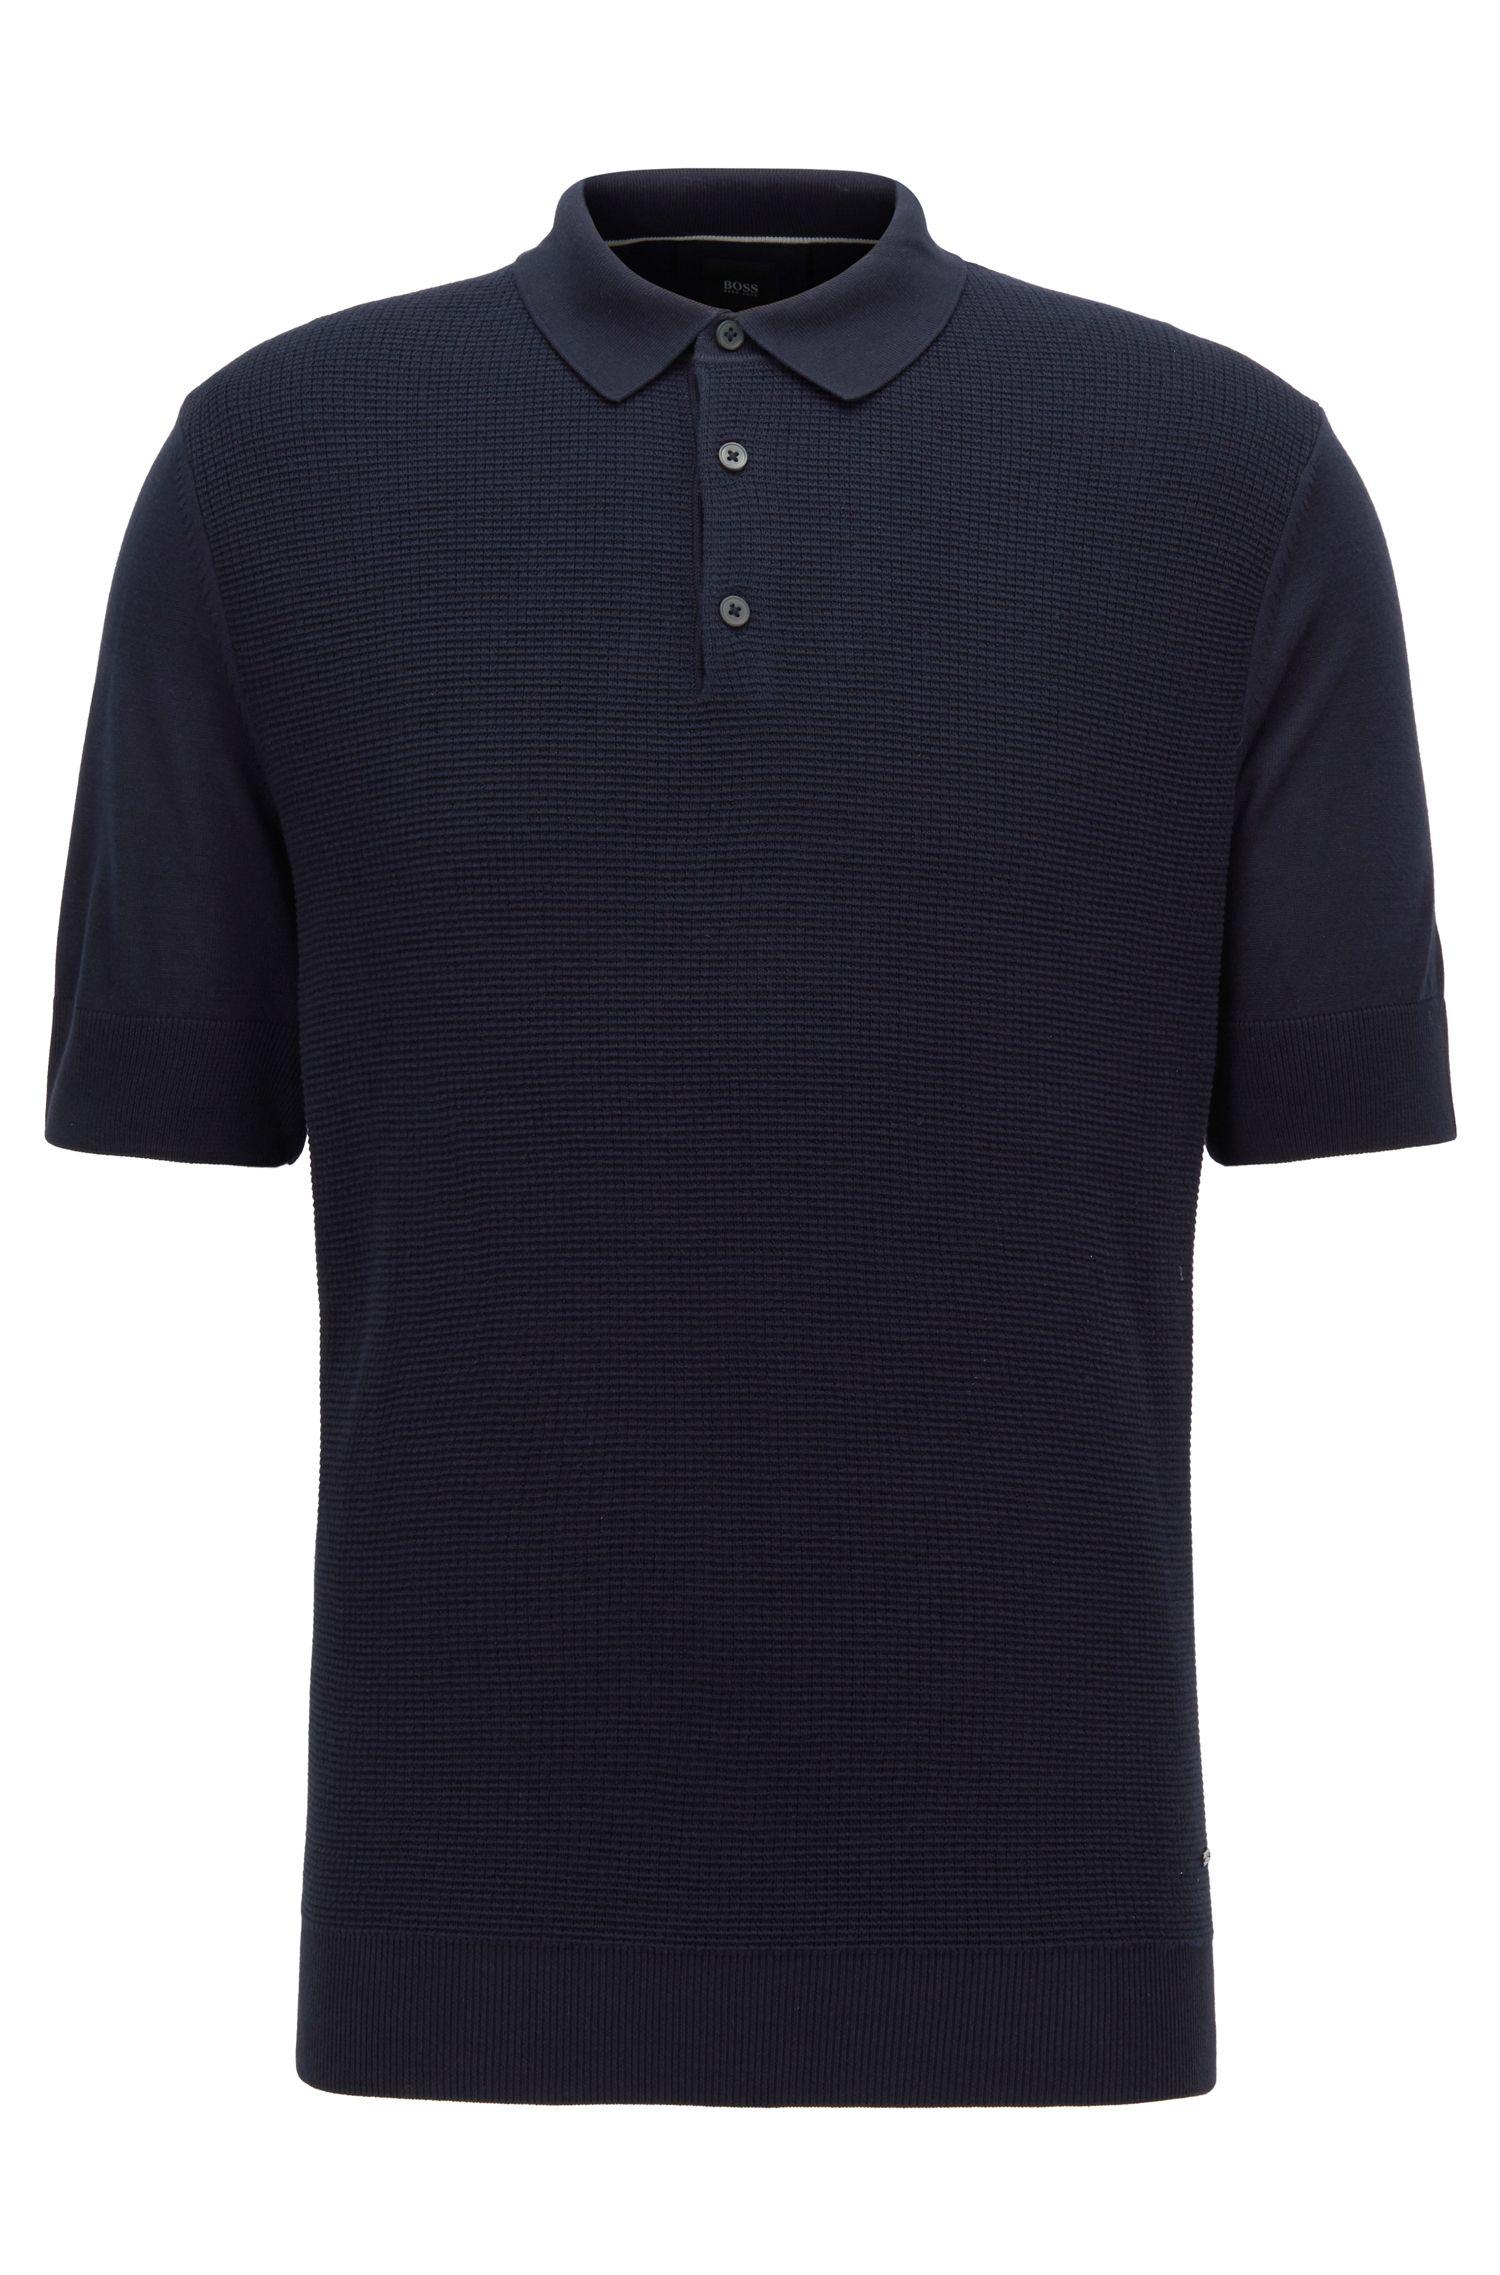 BOSS by Hugo Boss Short Sleeved Silk Blend Sweater With Polo Collar in ...